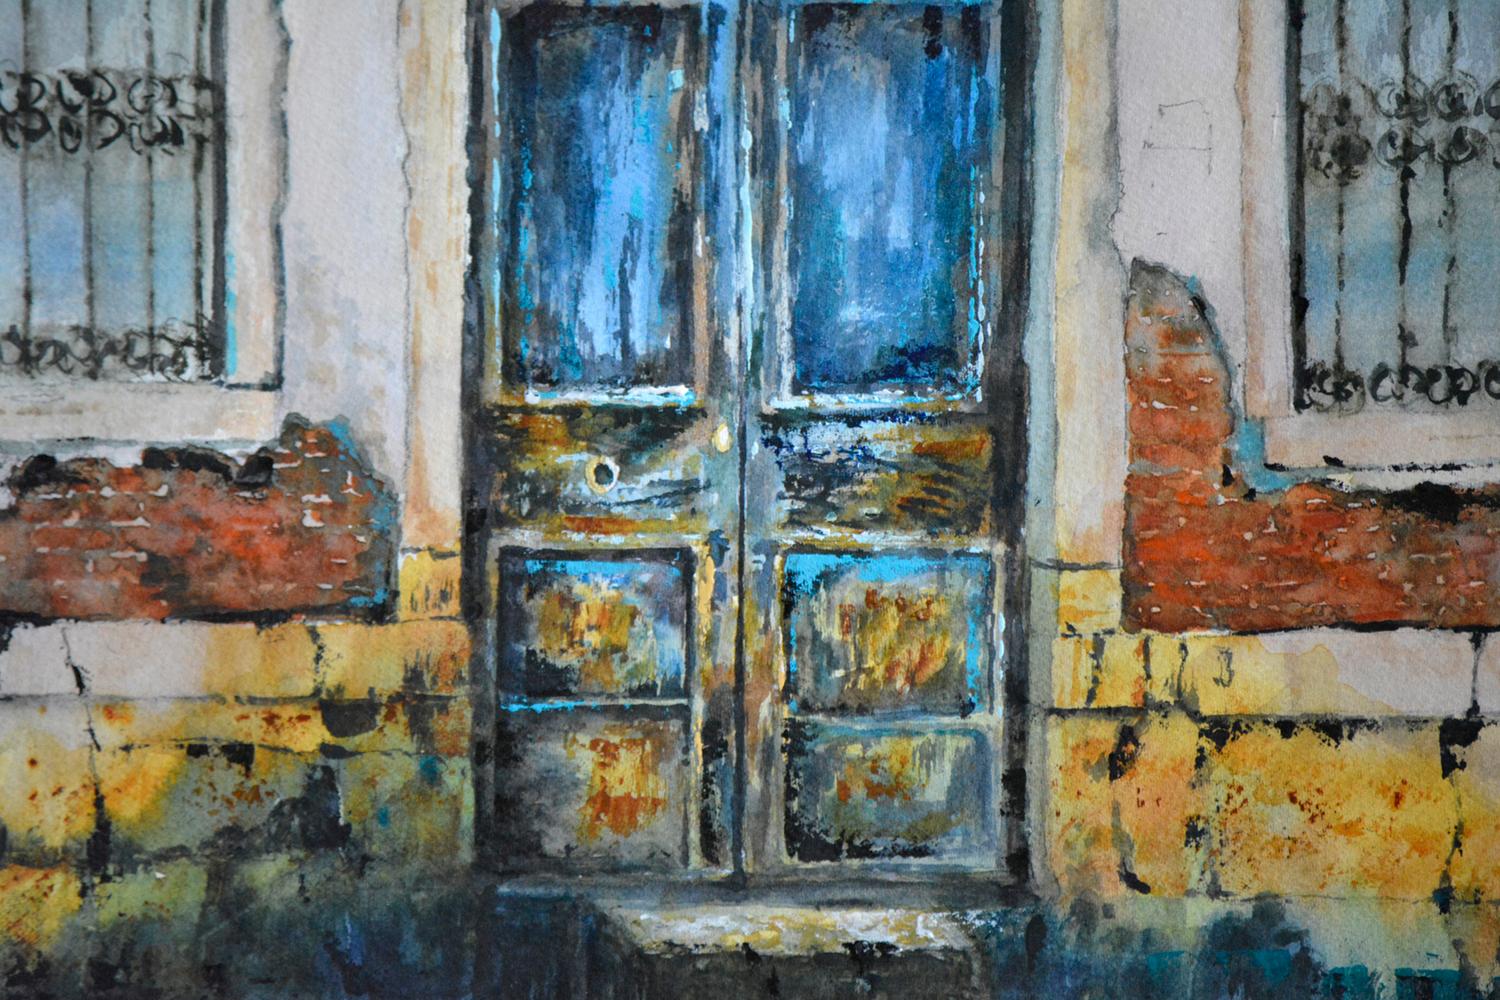 <p>Artist Comments<br>Artist Judy Mudd presents an arched doorway in Venice in a detailed impressionistic rendering. Part of her Urban collection pays homage to diverse cultural architecture. She draws enthrallment from the exquisite and cool colors